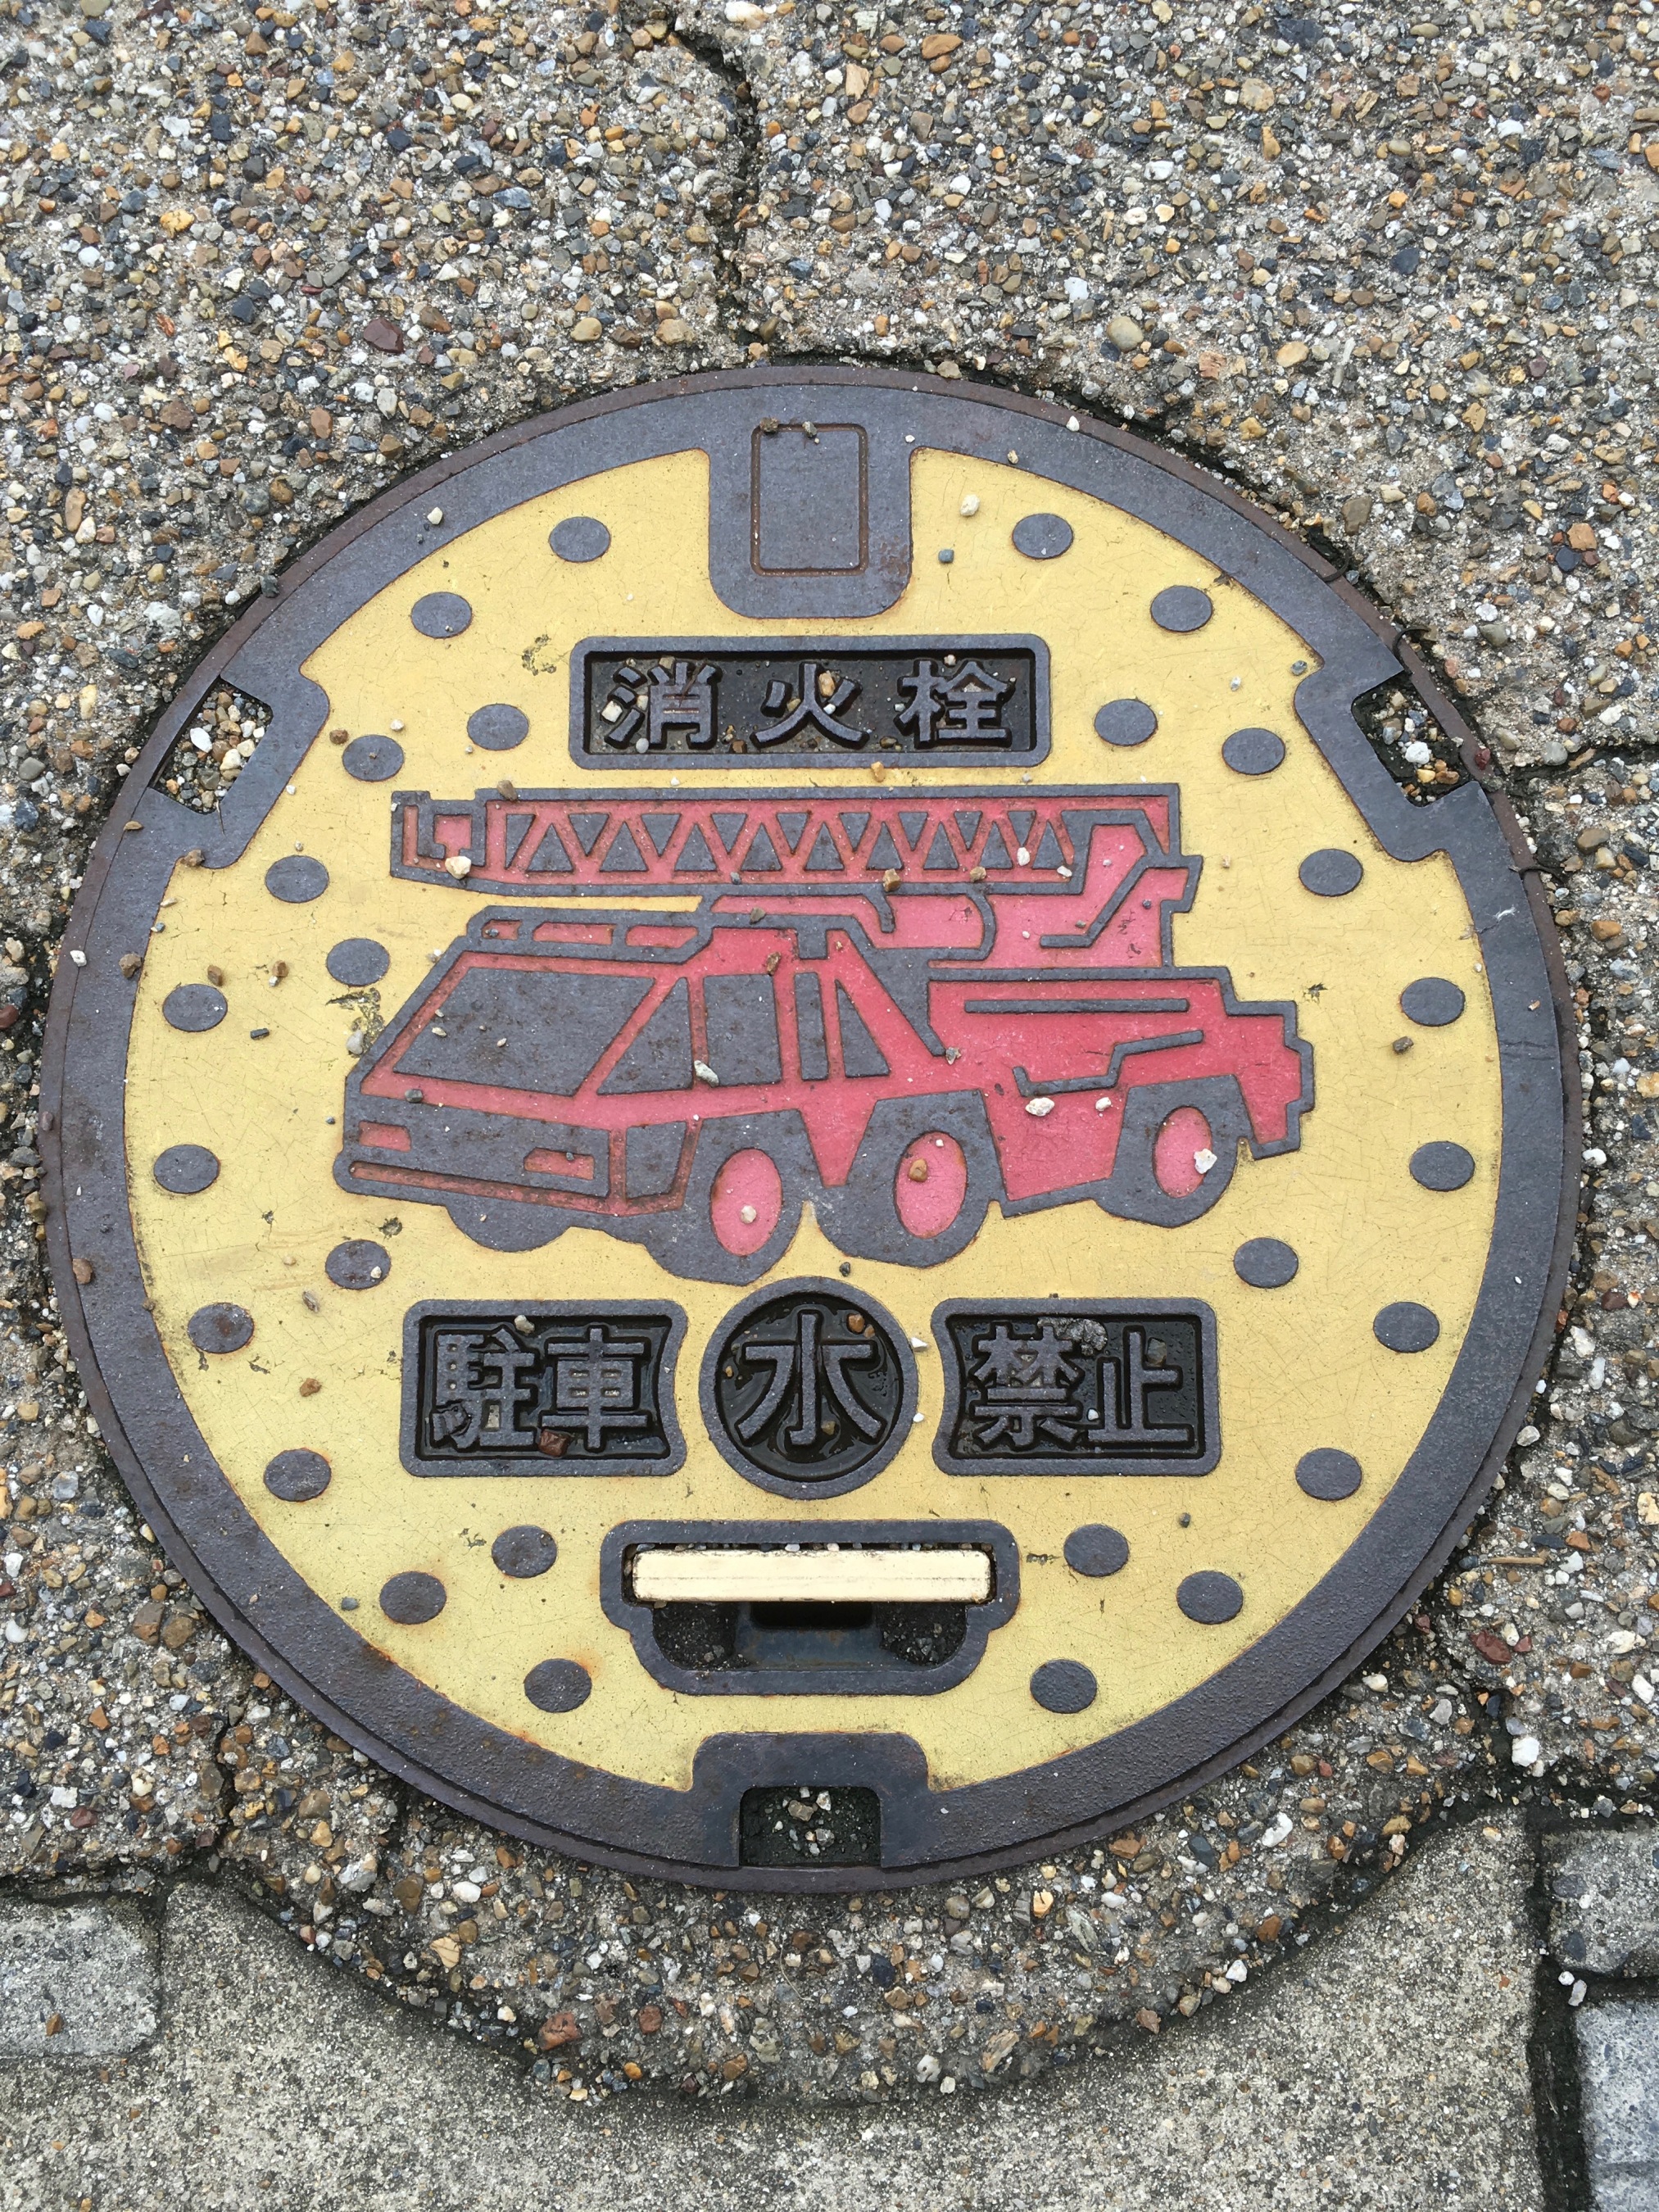 Here the kanji for fire (middle top) and water (middle bottom) are found together on a man-hole cover in Uji. It is the best example I found of the two kanji together and reminds us of their interconnectedness.